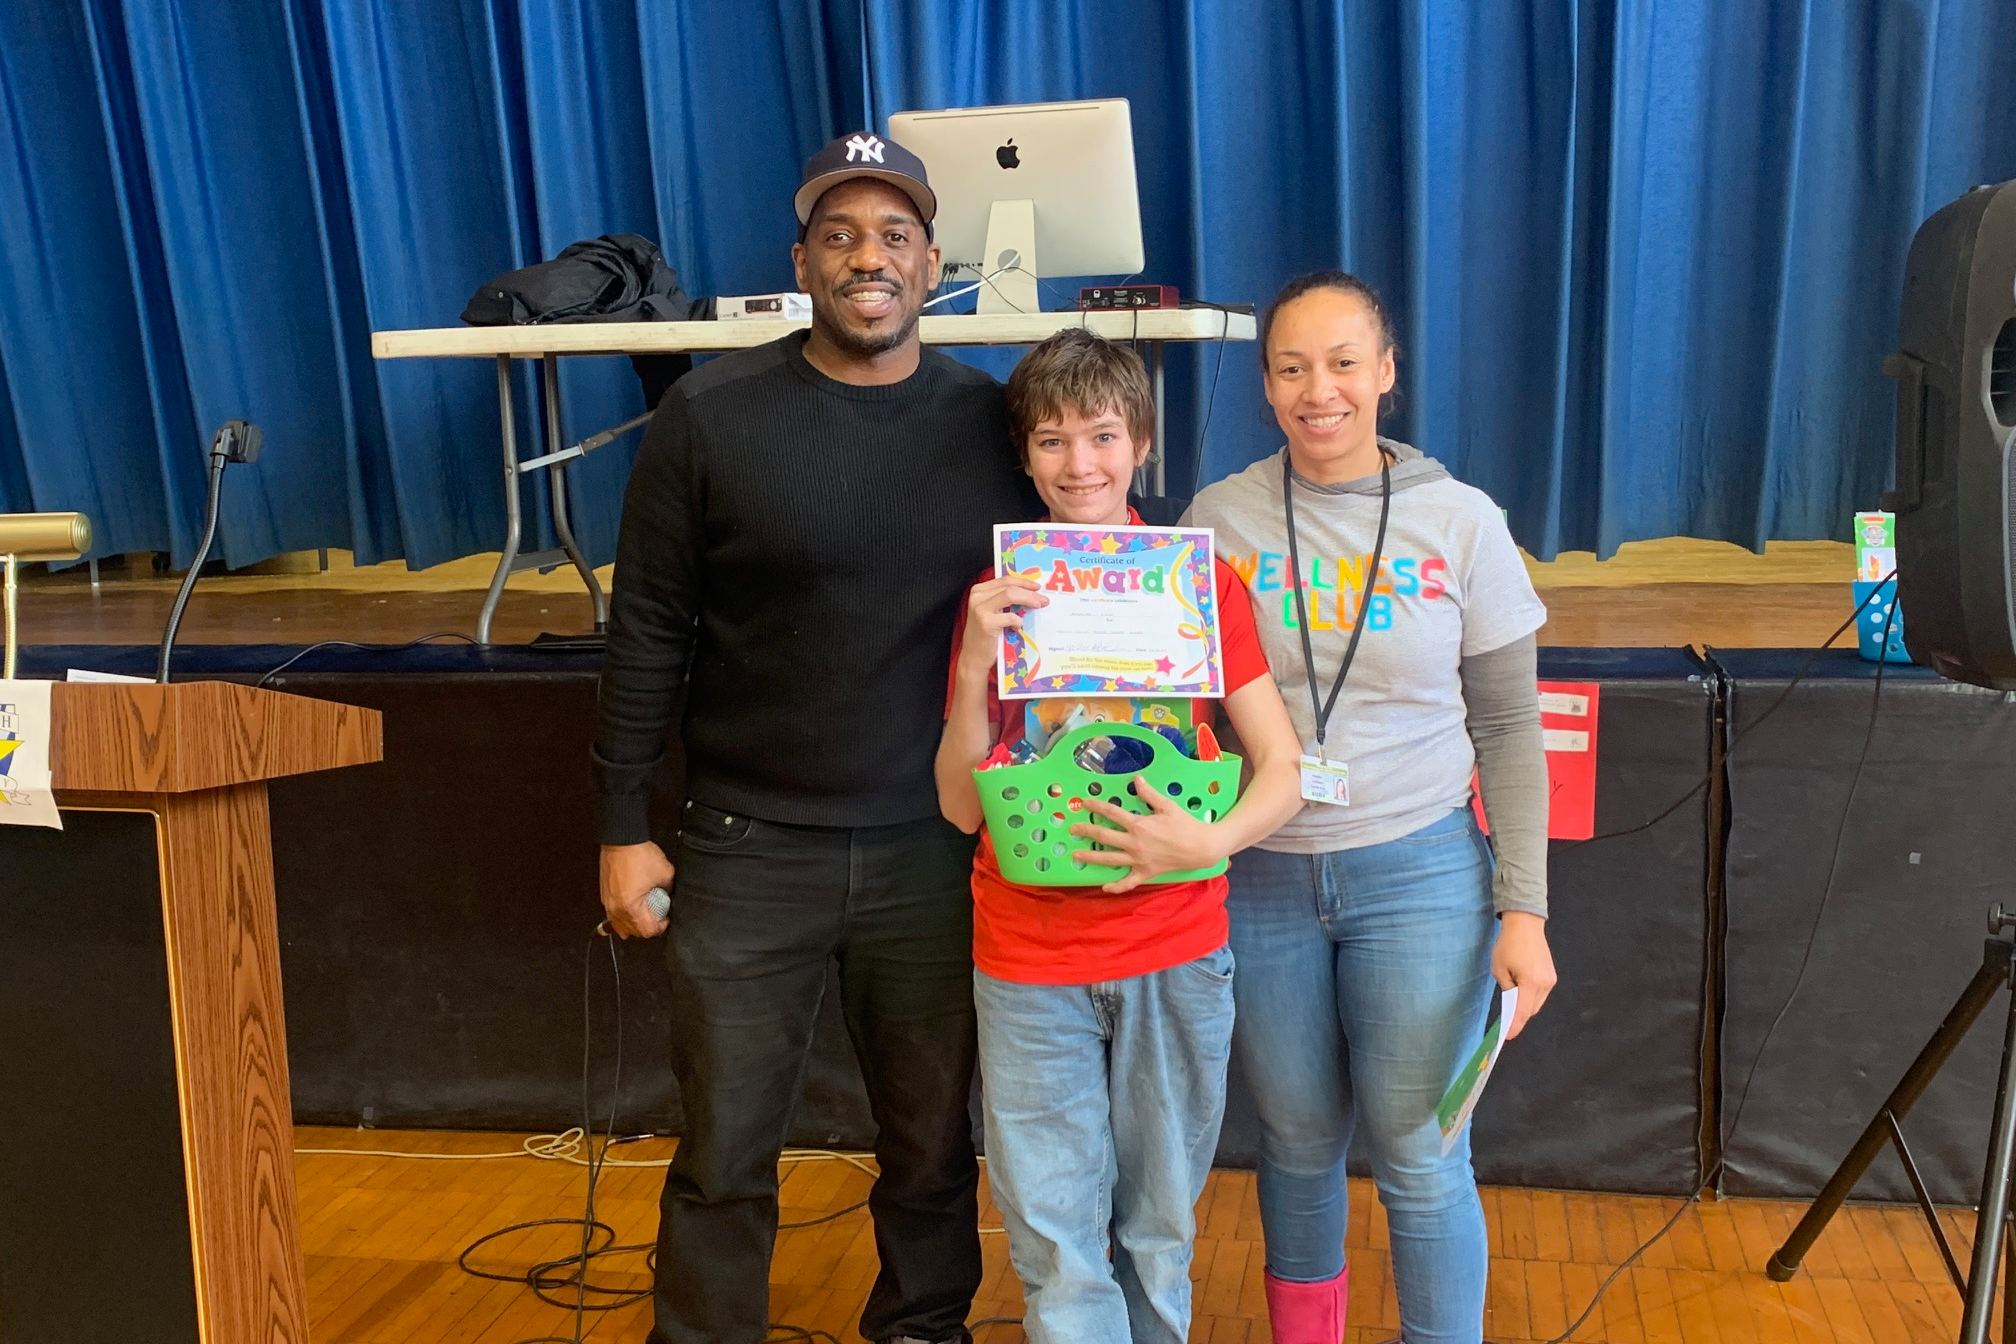 Mr. Bennett and Ms. Lacasse pose with a student who is standing in the middle holding his award and PBIS certificate for healthy living